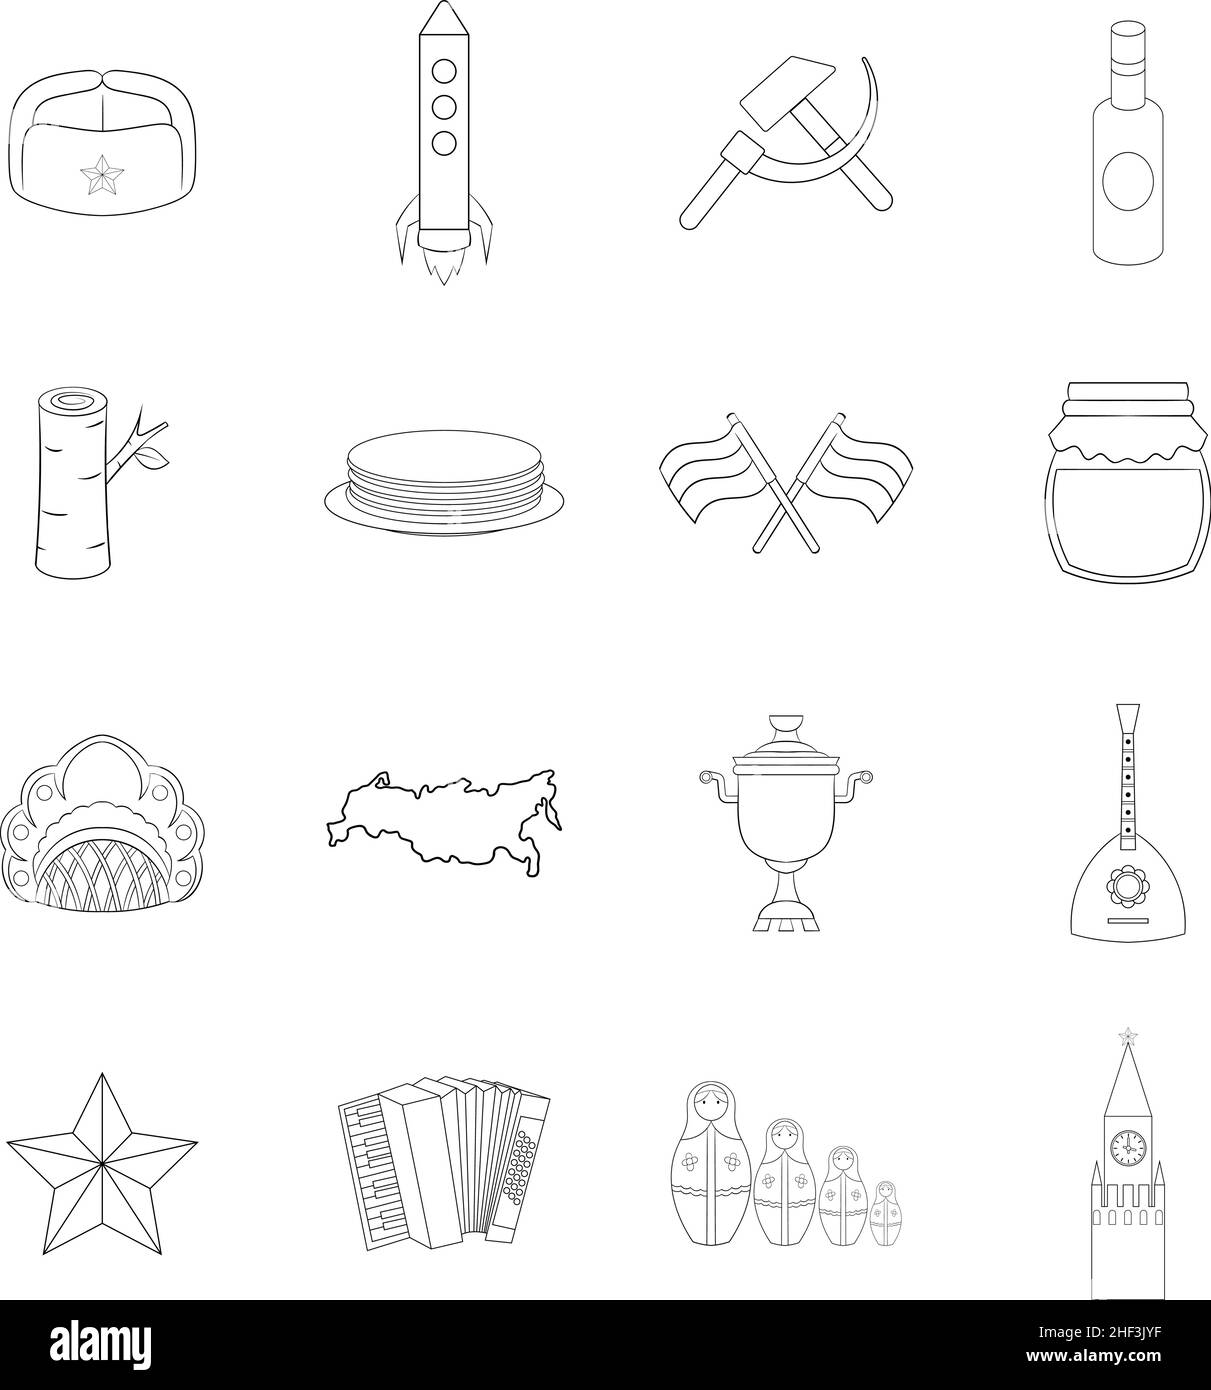 Russia set icons in outline style isolated on white background Stock Vector